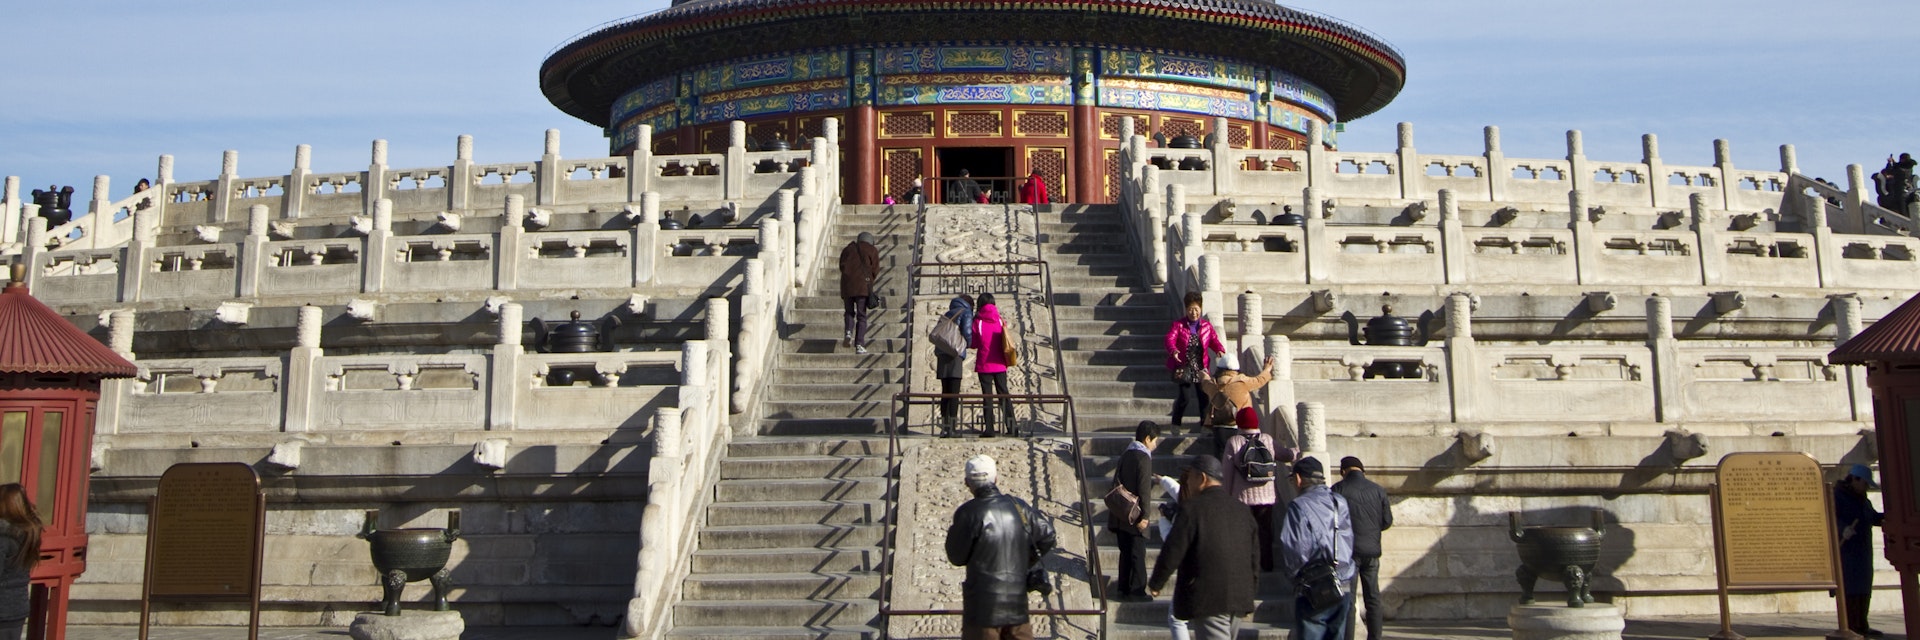 Hall of Prayer for Good Harvest in Temple of Heaven Park, Chongwen.